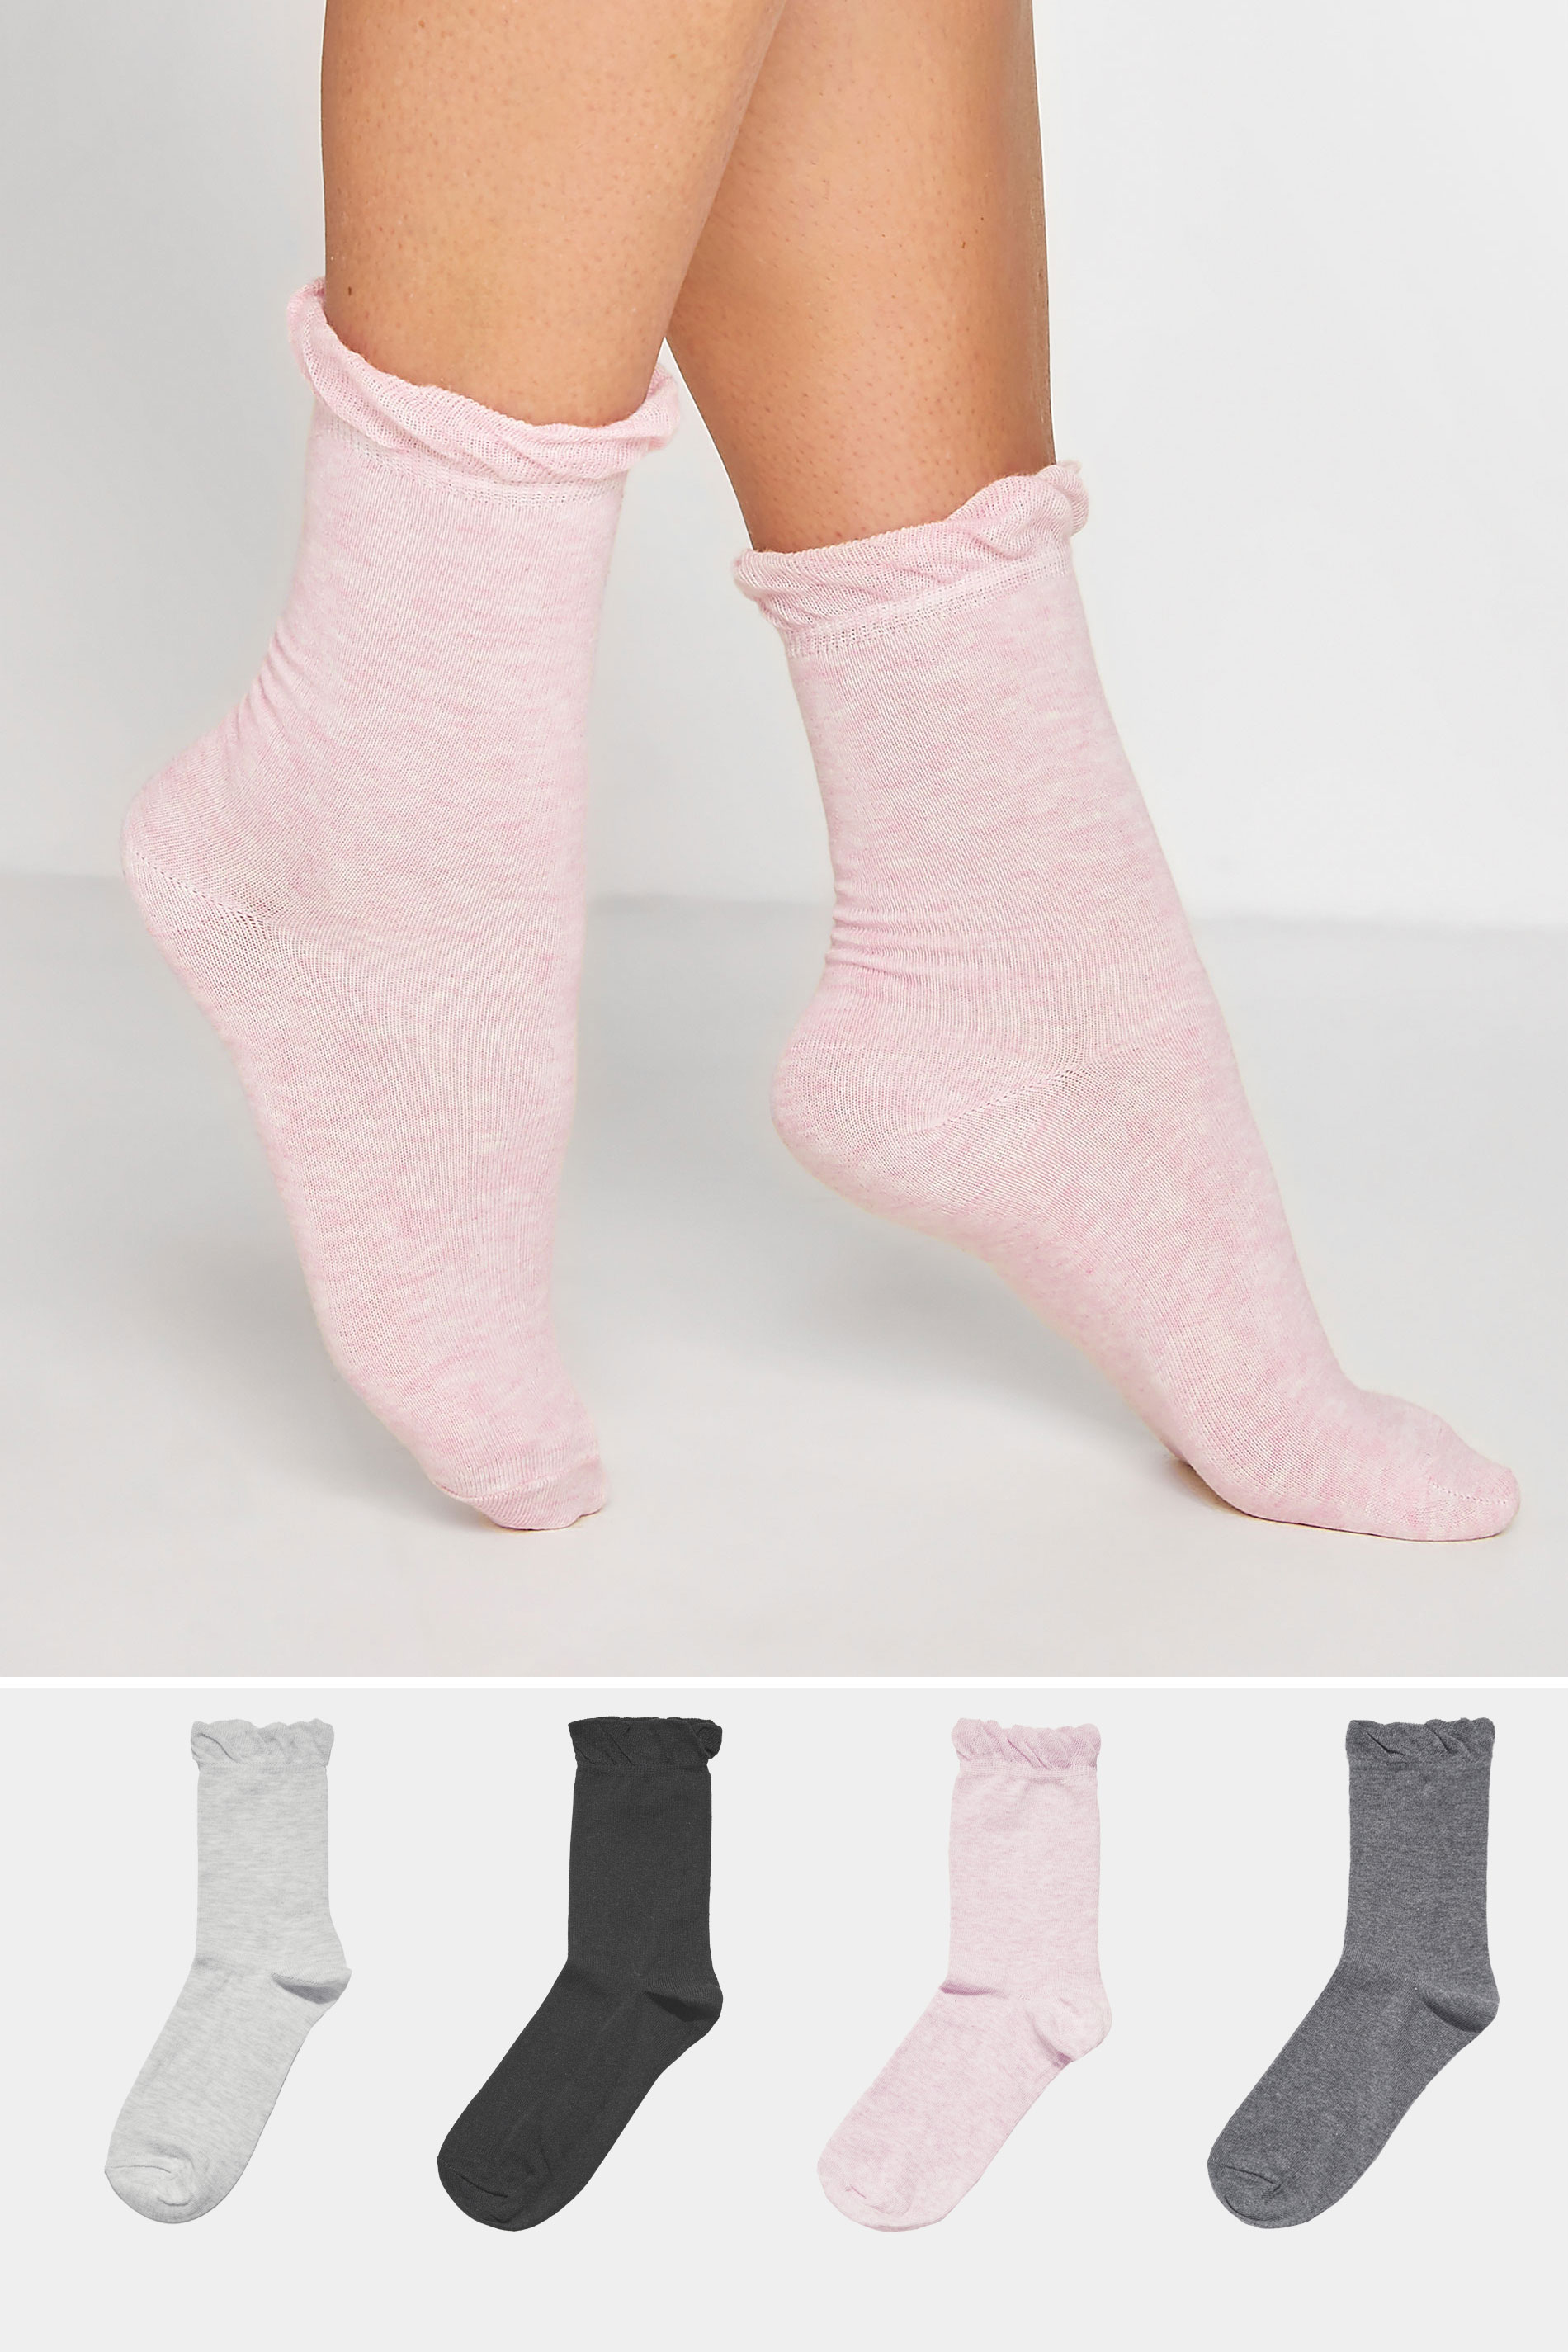 4 PACK Grey & Pink Ankle Socks | Yours Clothing  1